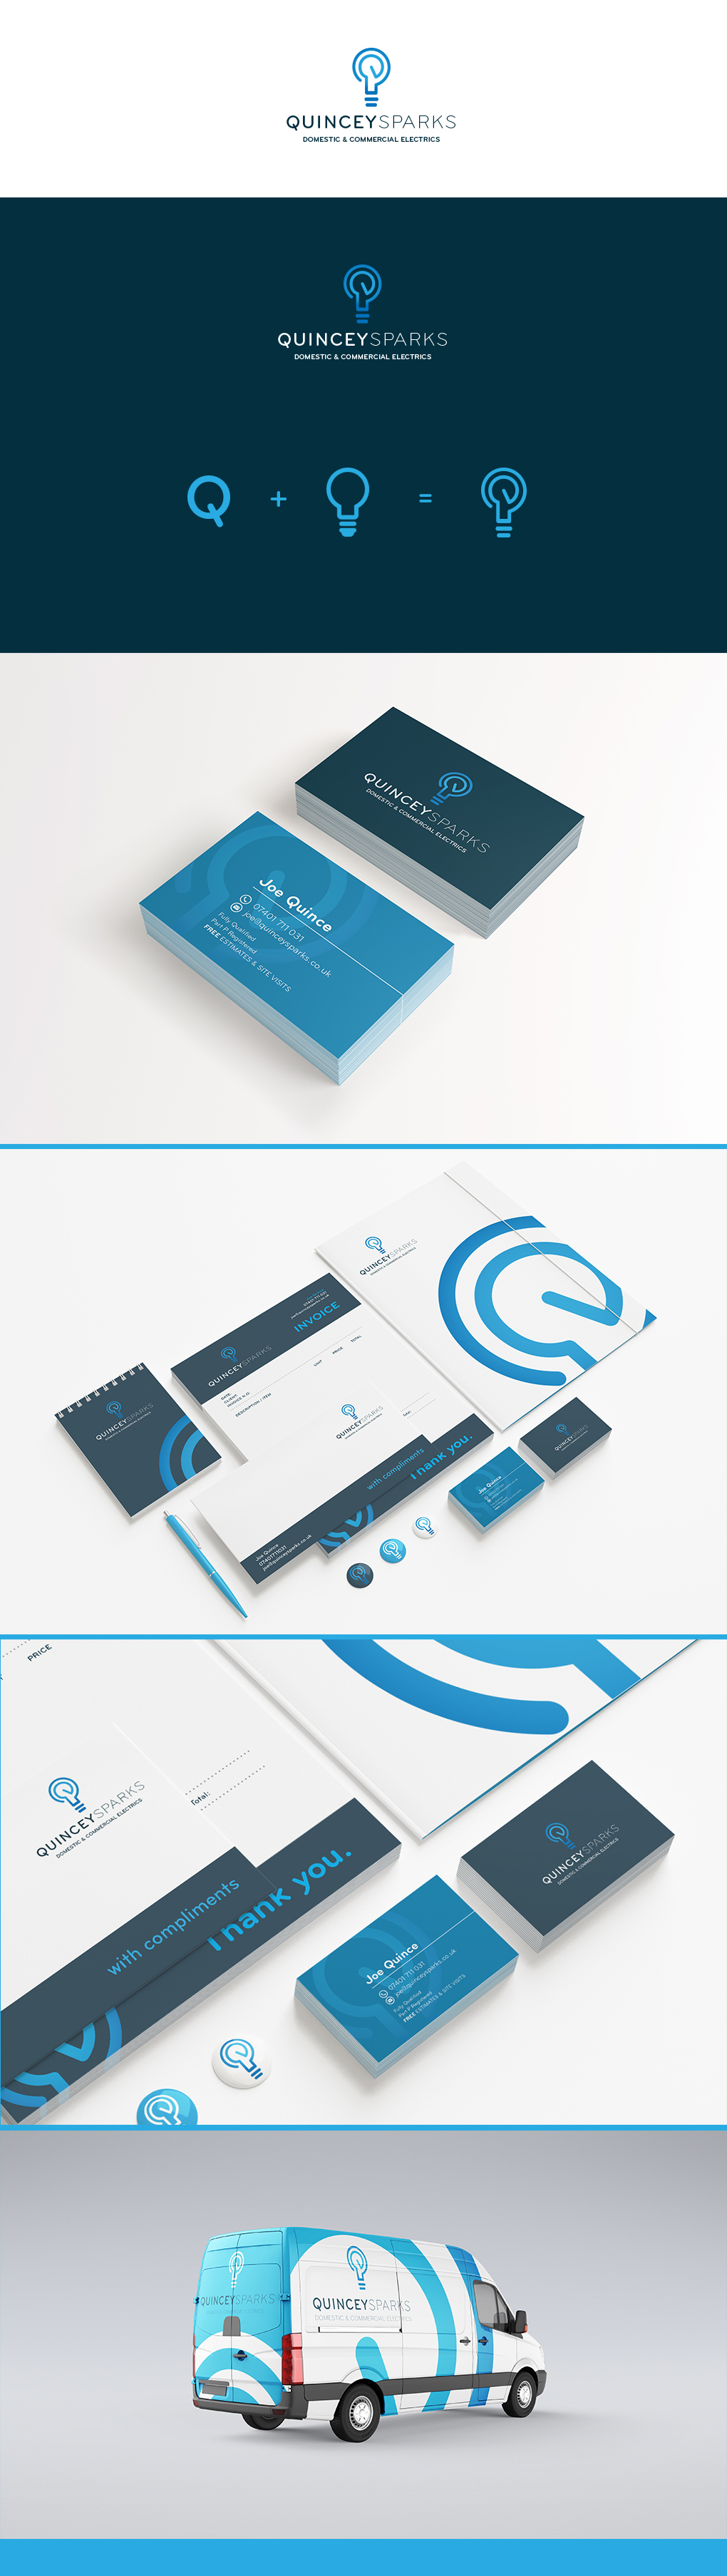 Quincey Sparks Logos, Stationery and Vehicle Branding